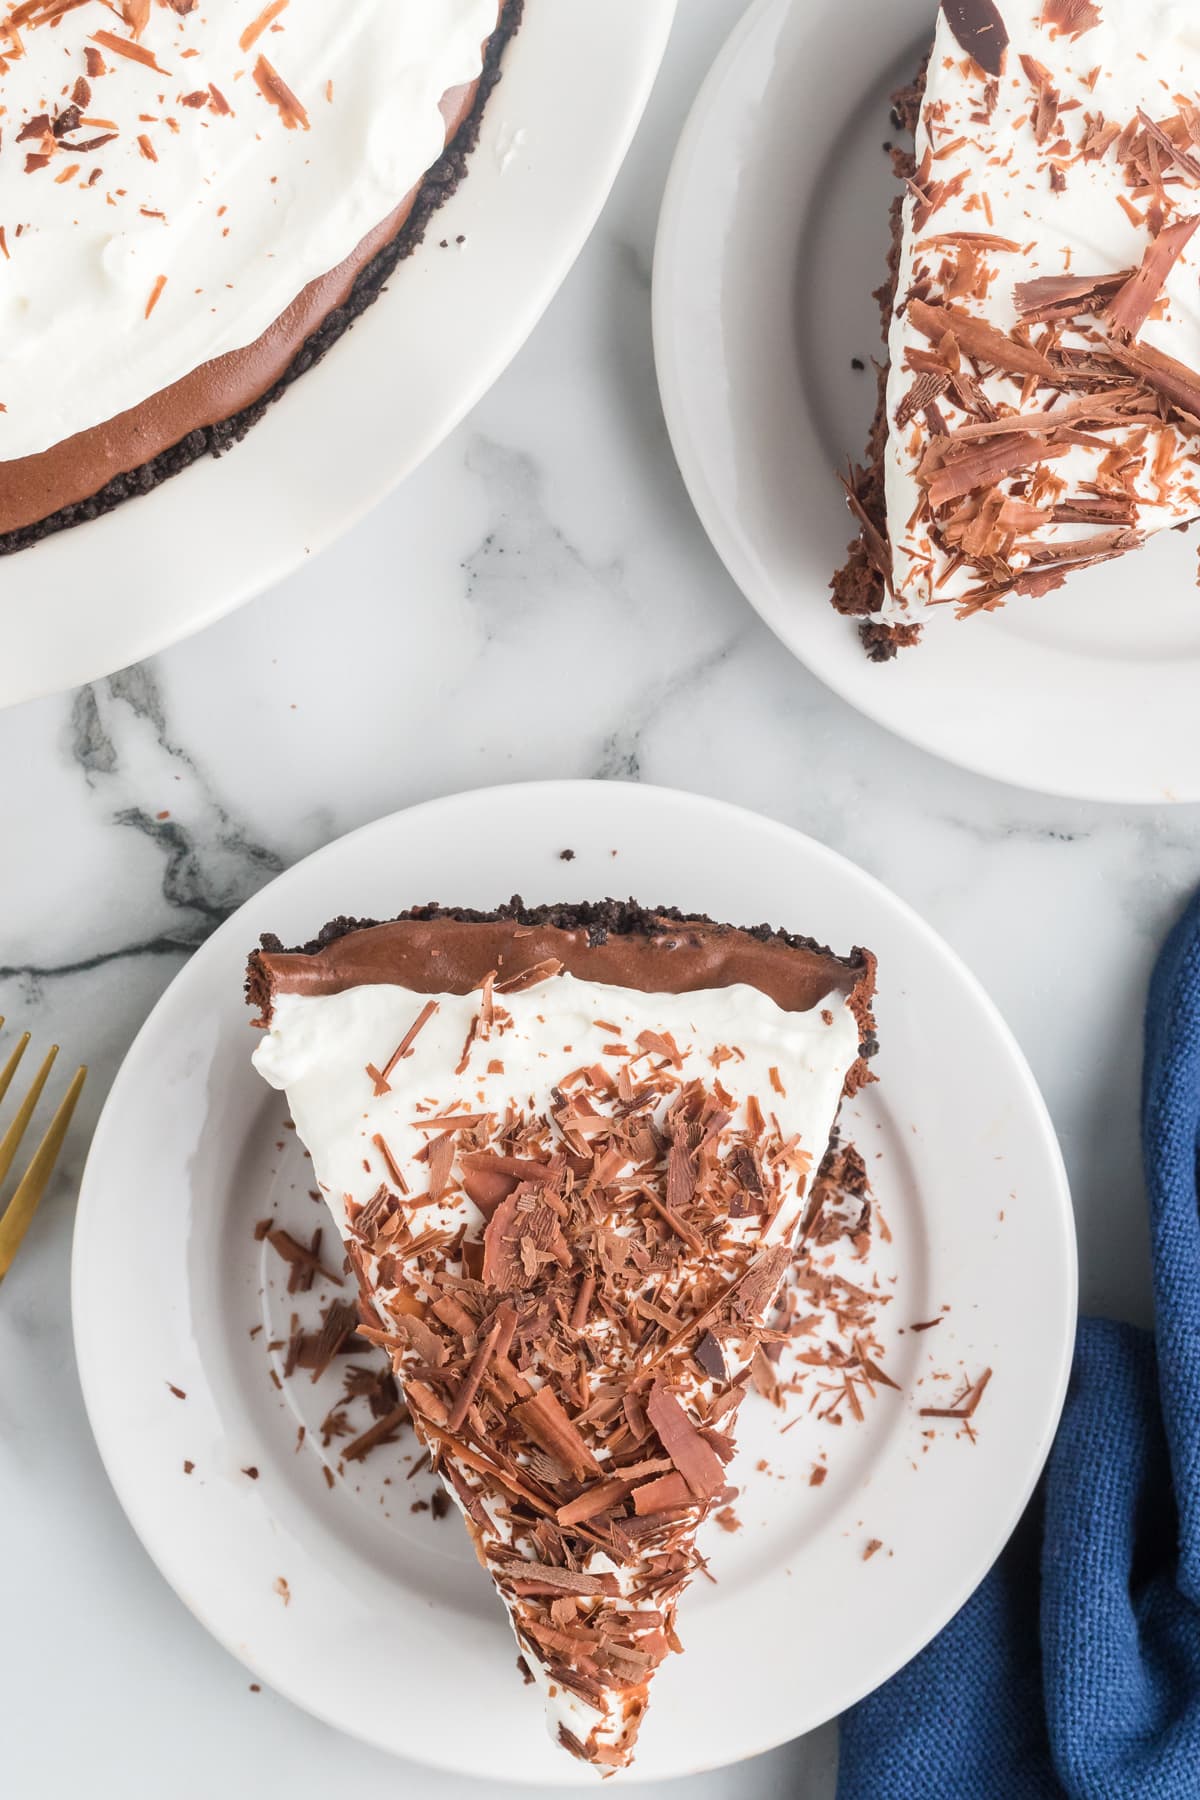 Overhead view of a slice of French silk pie on a plate